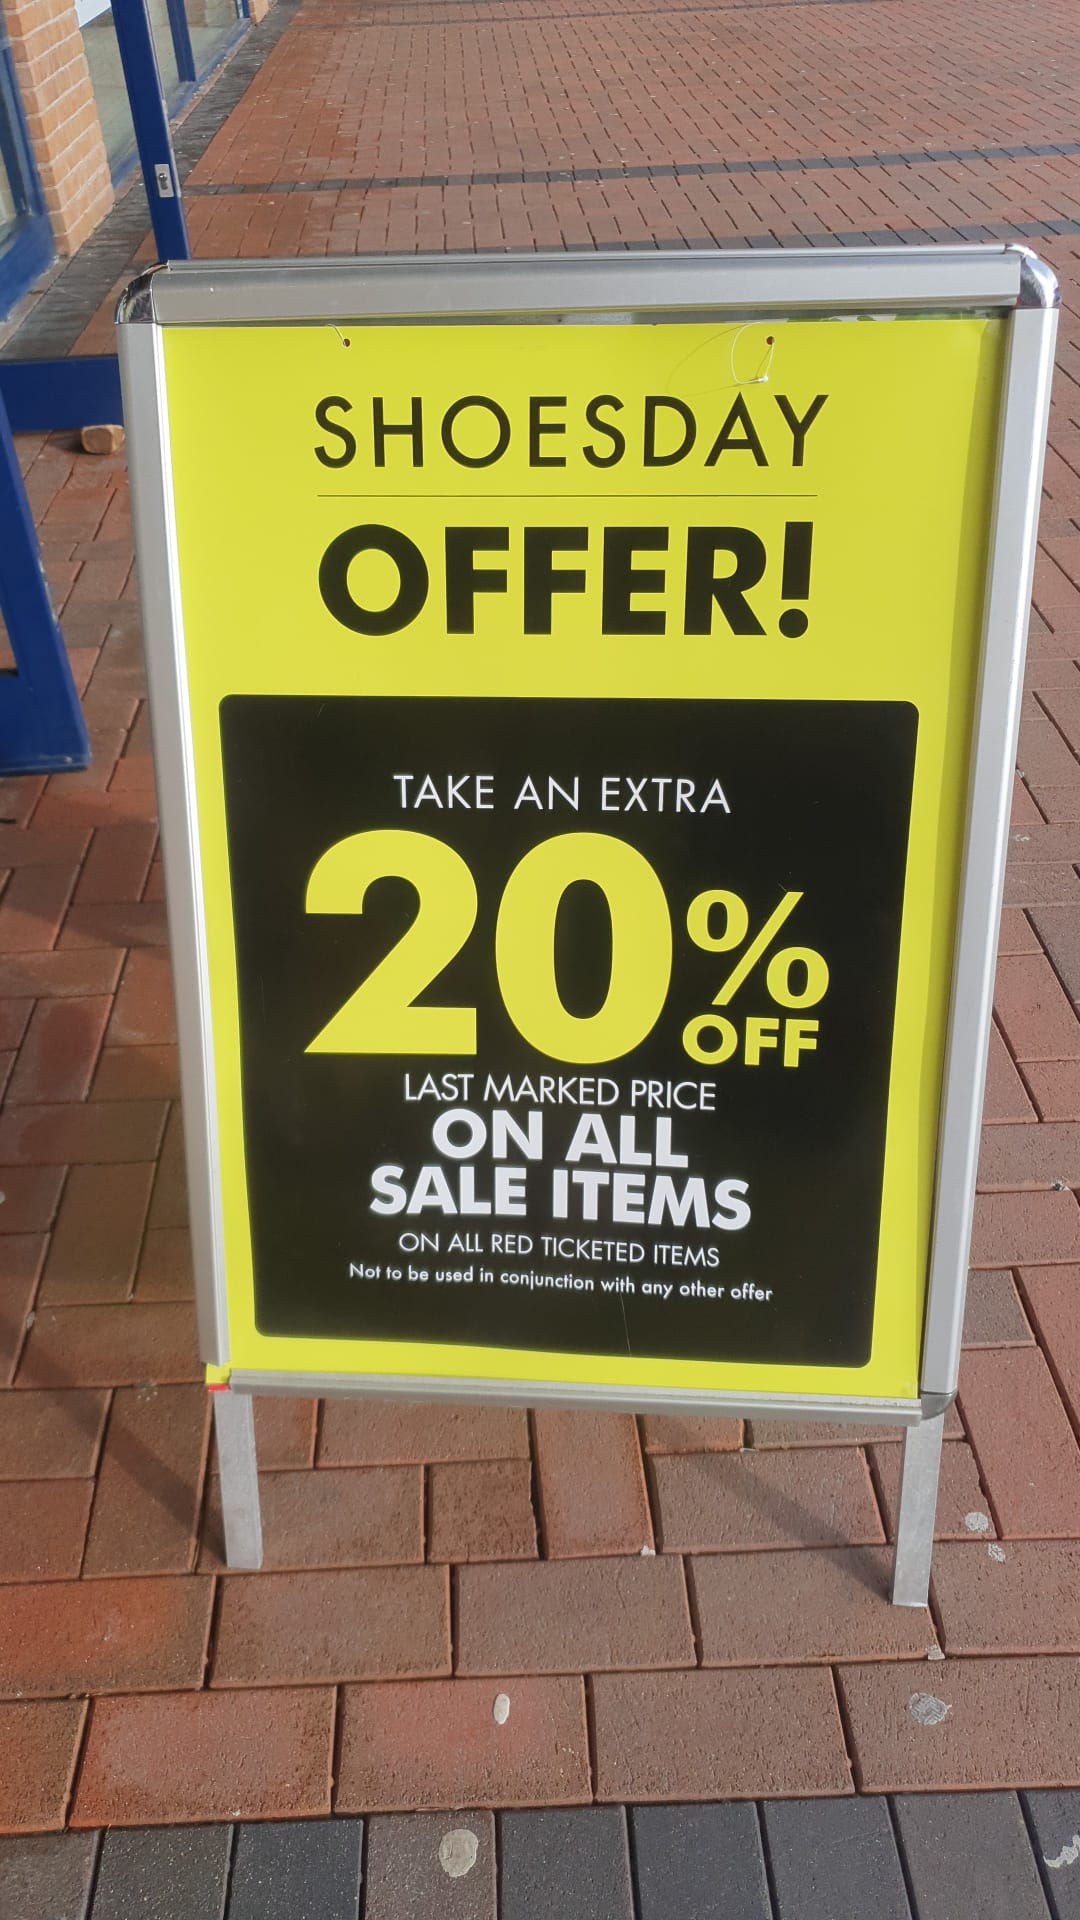 Pavers Shoes have a 20% Shoeday offer on!